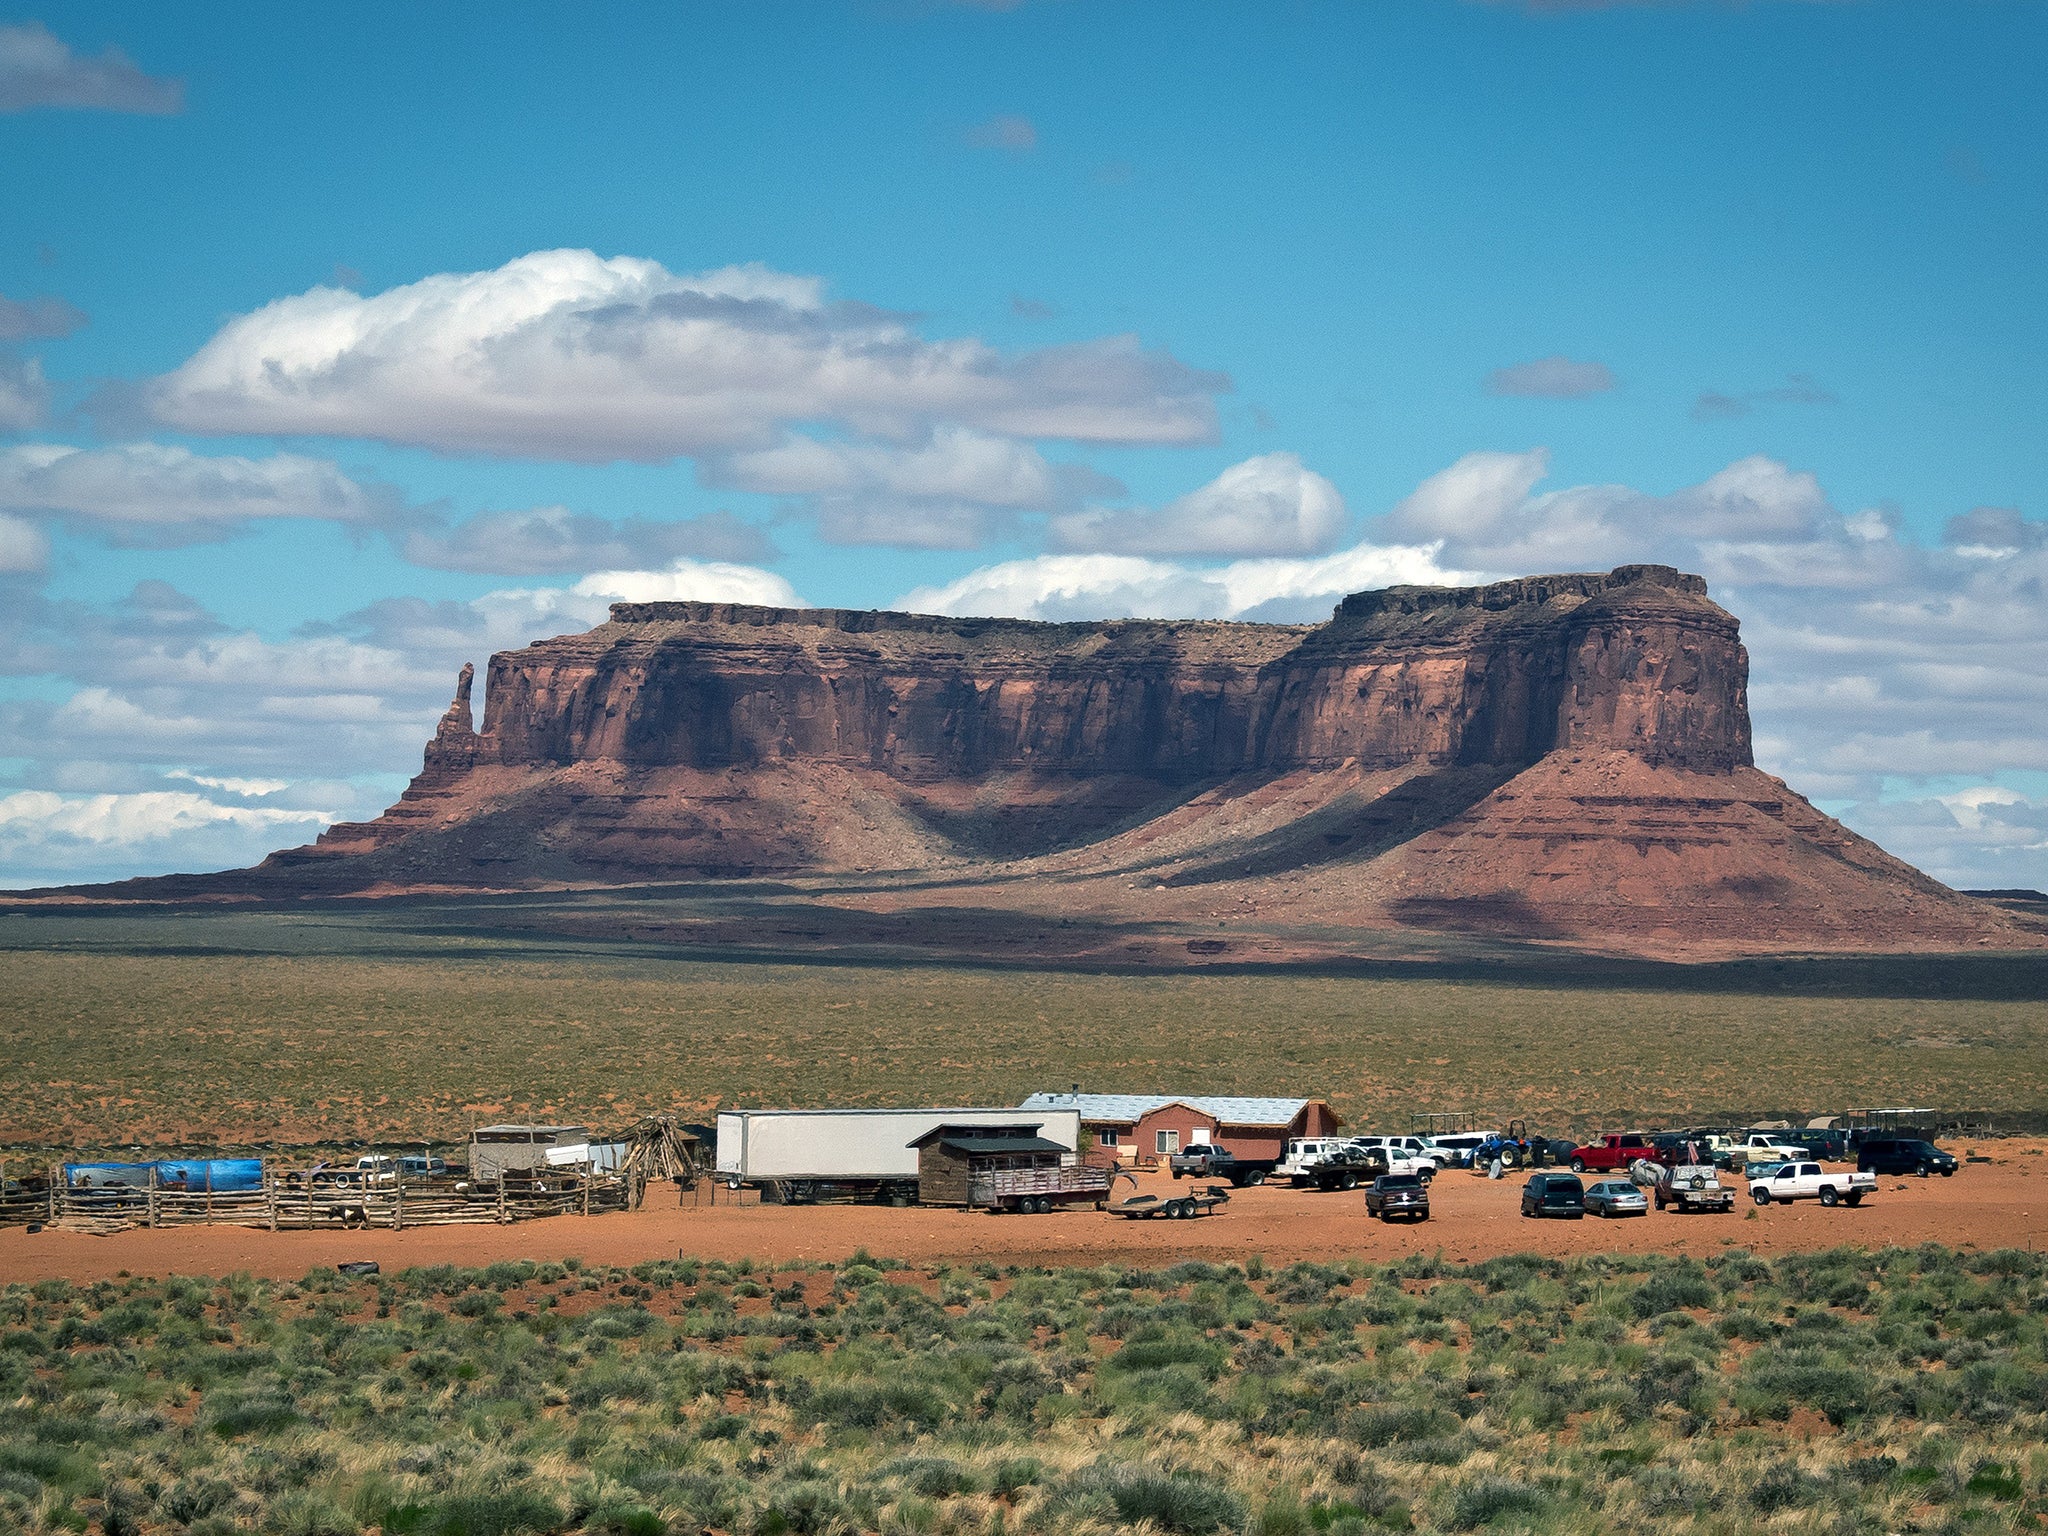 A Navajo farm is seen next to a rock formation in Monument Valley Navajo Tribal park, Utah